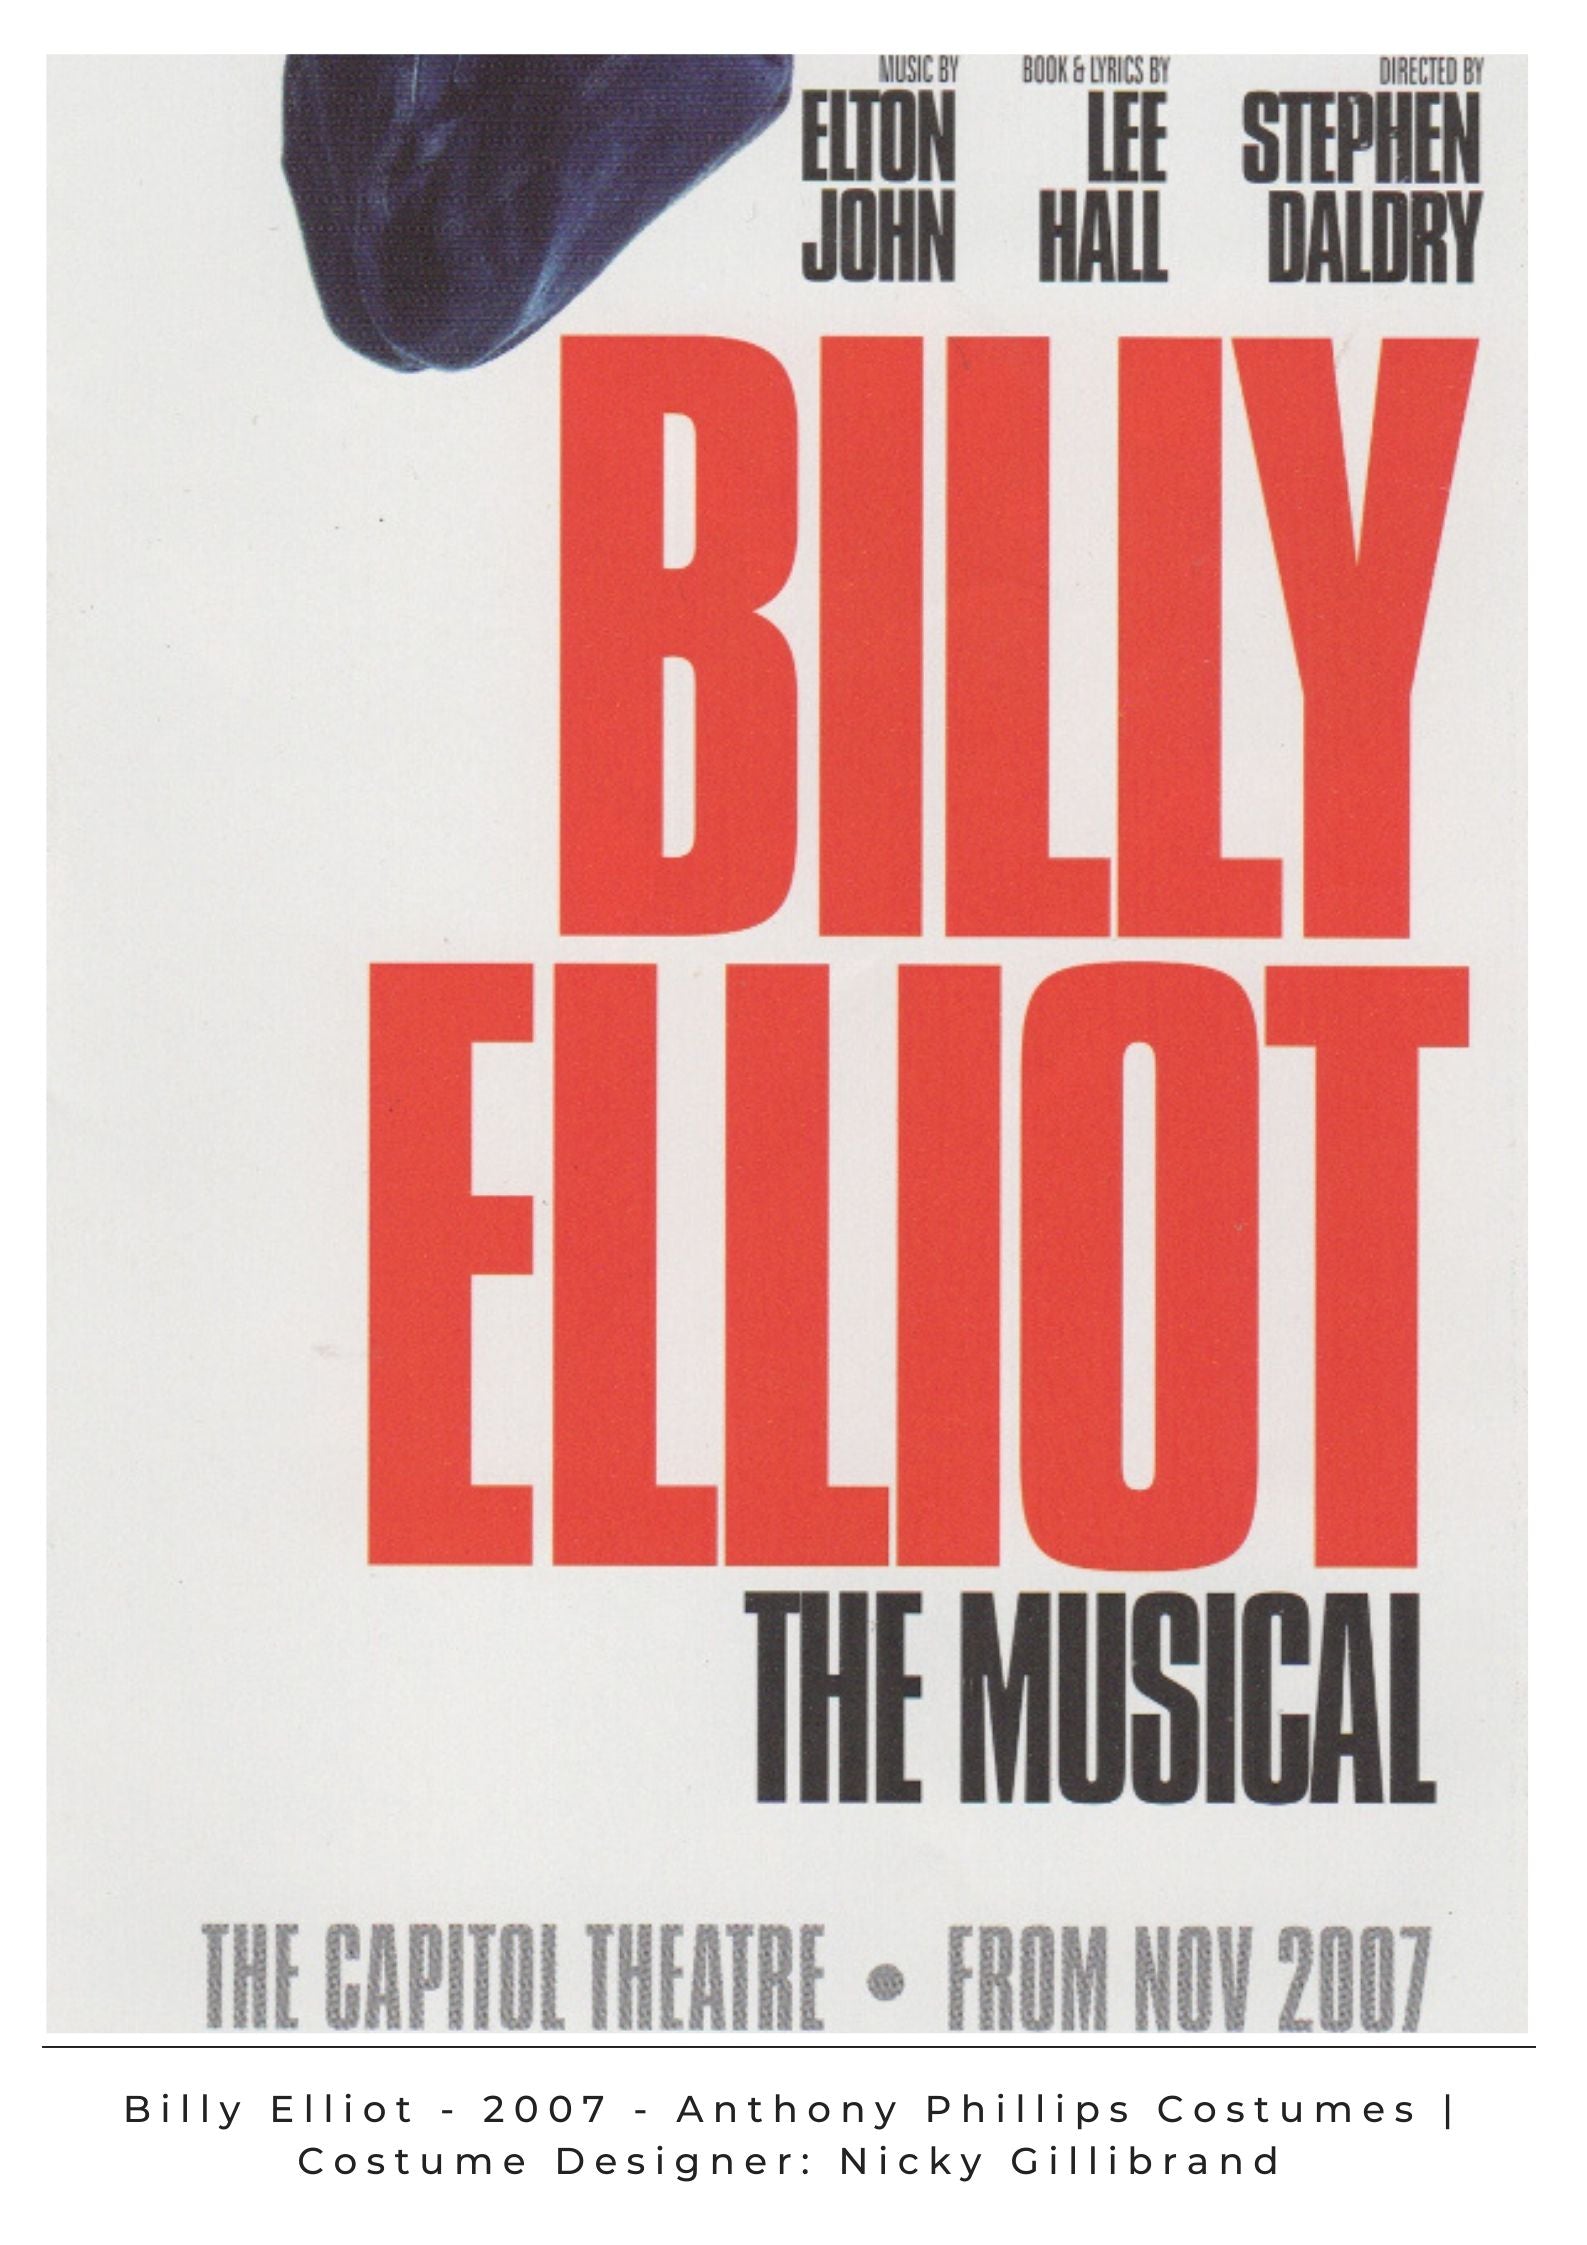 Billy Elliot The Musical Entertainment Industry Theatre Movie Work Costume Construction Work Seamstress Draper